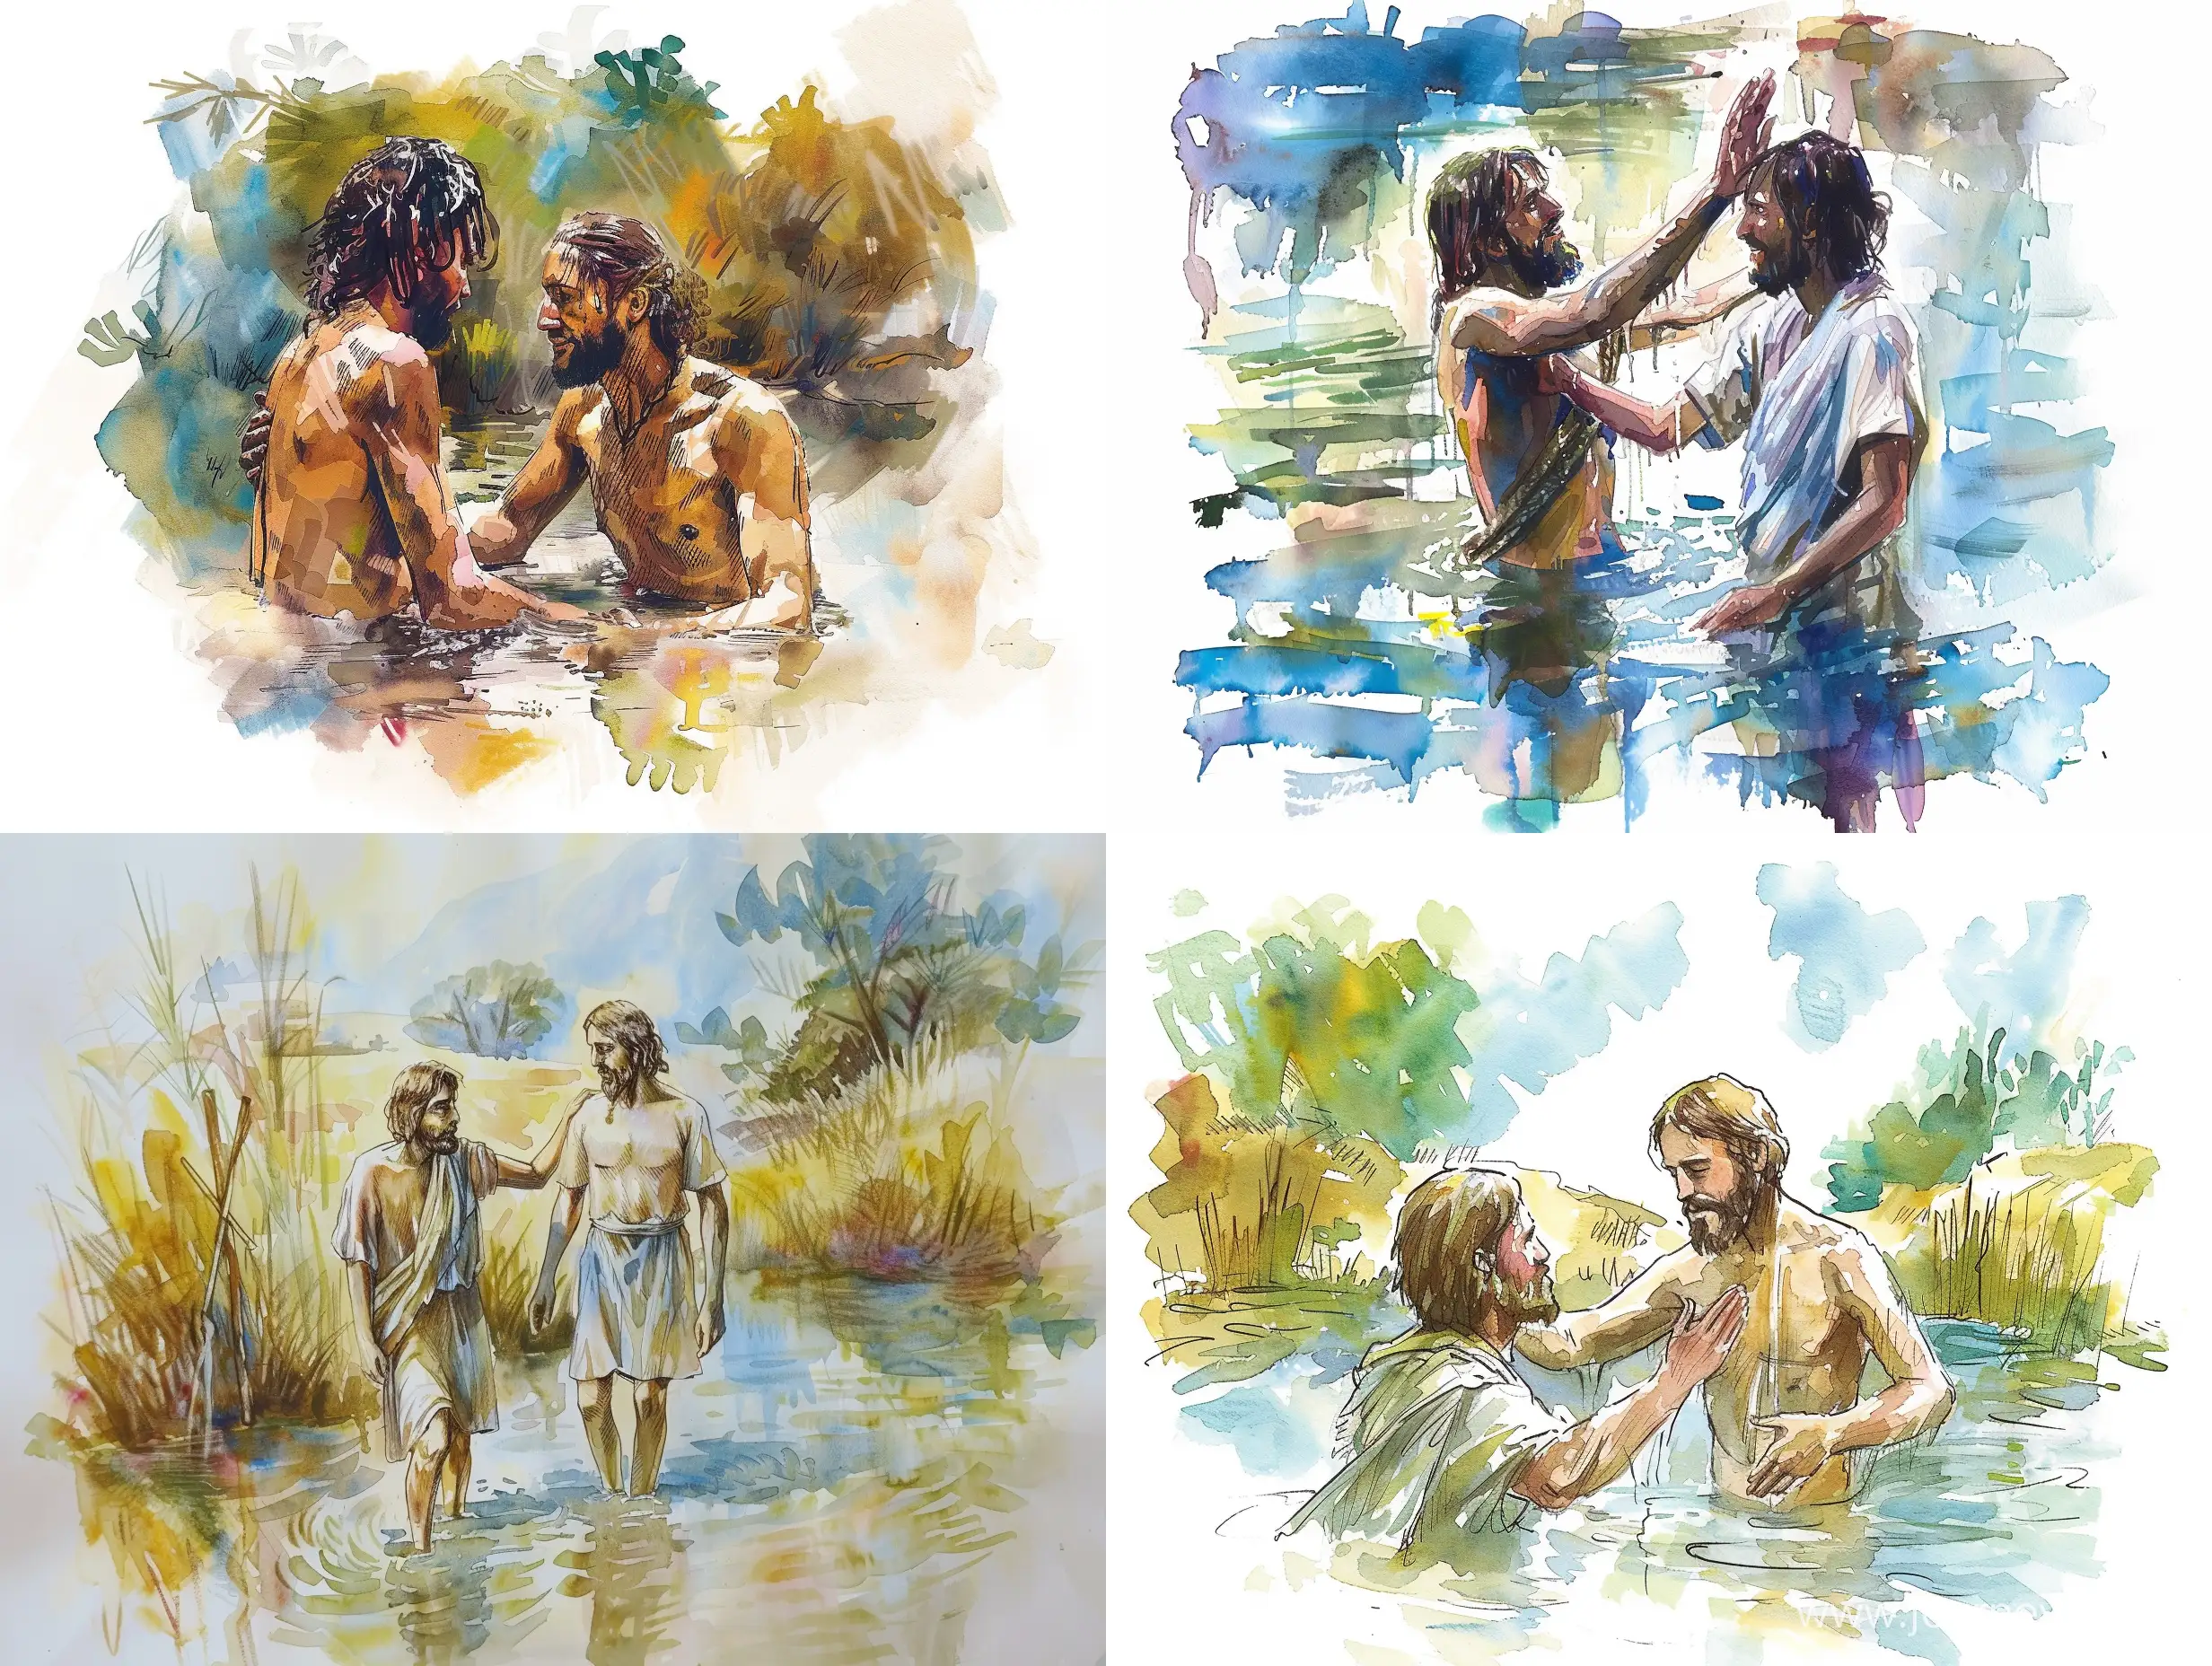 draw a picture in the technique of watercolor painting on the subject of the baptism of jesus christ by john the baptist